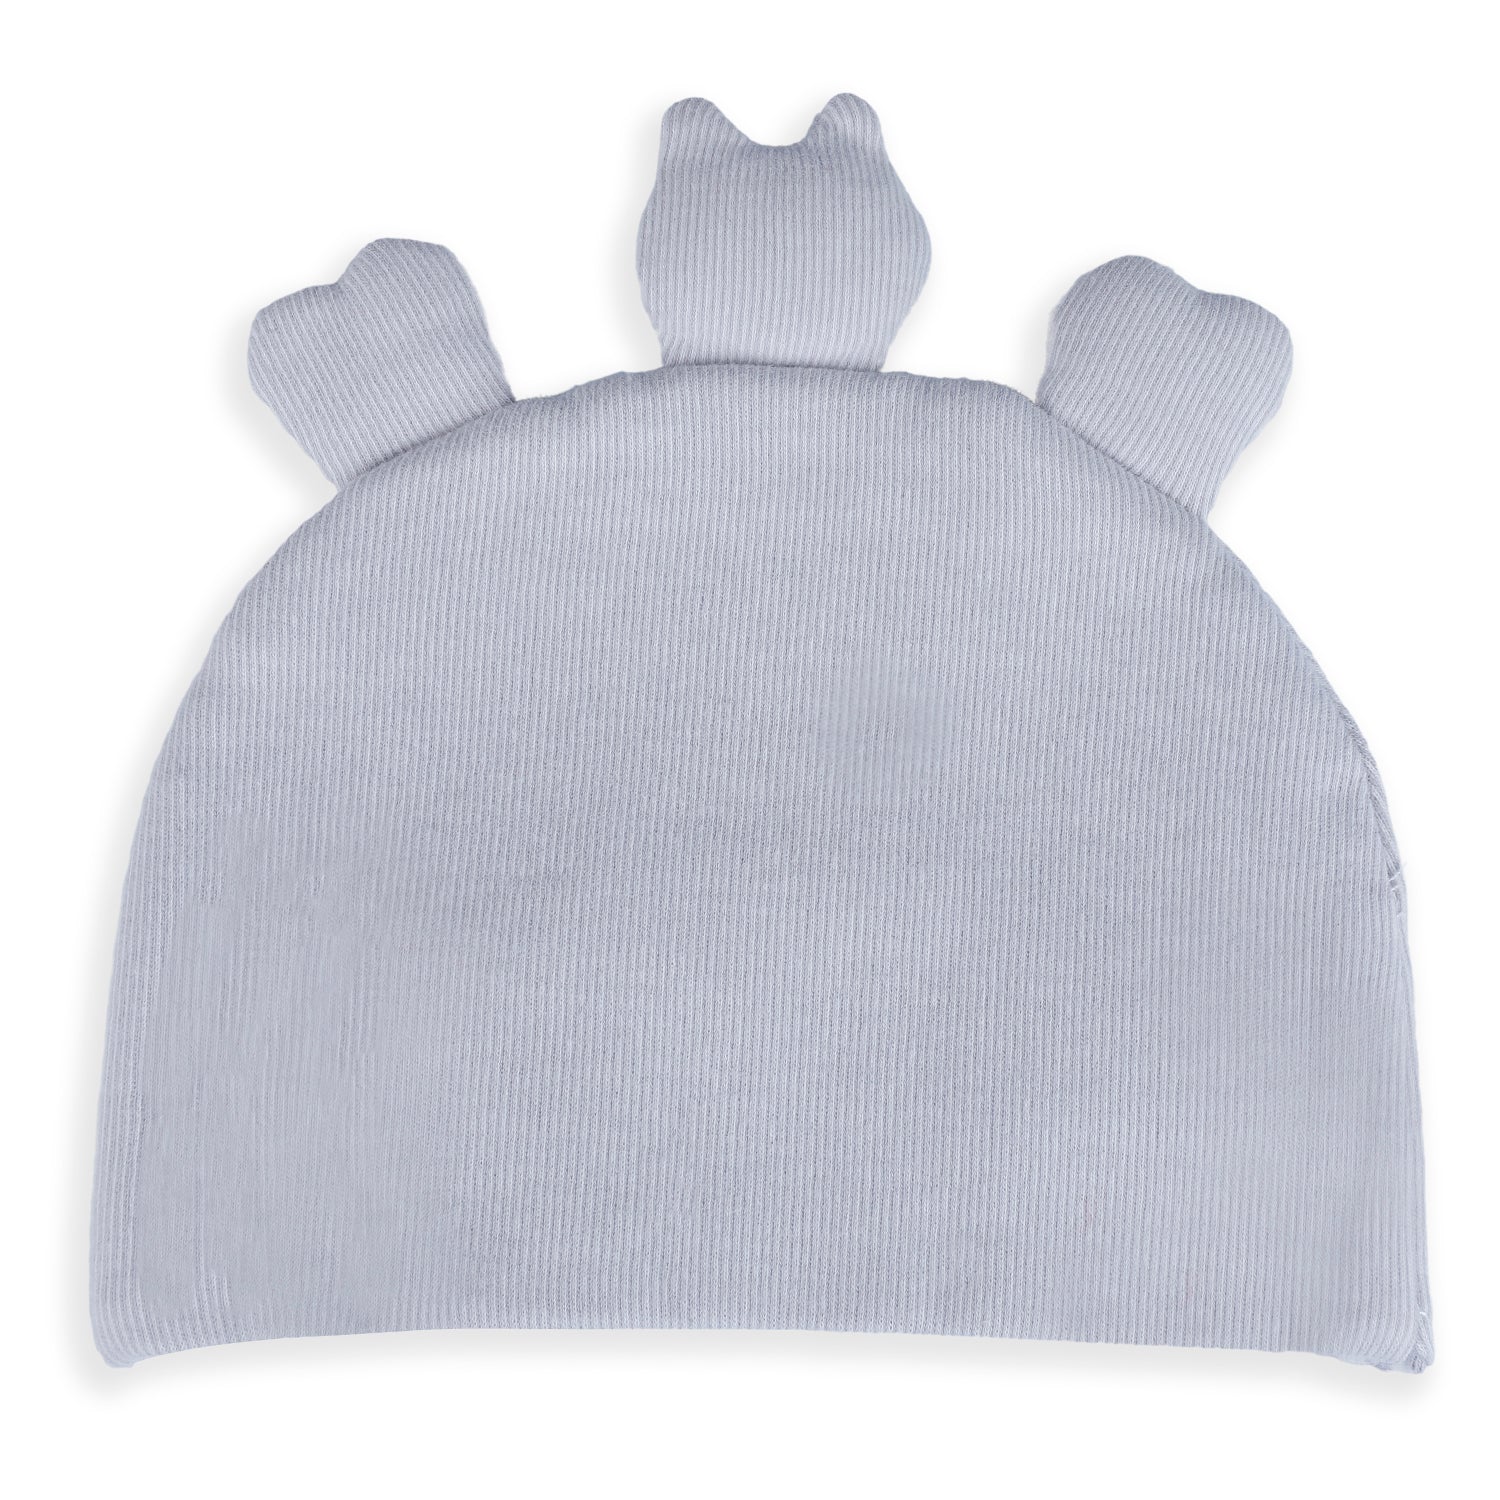 Baby Moo Cute Turtle Toddlers Cotton Cap - Grey - Baby Moo